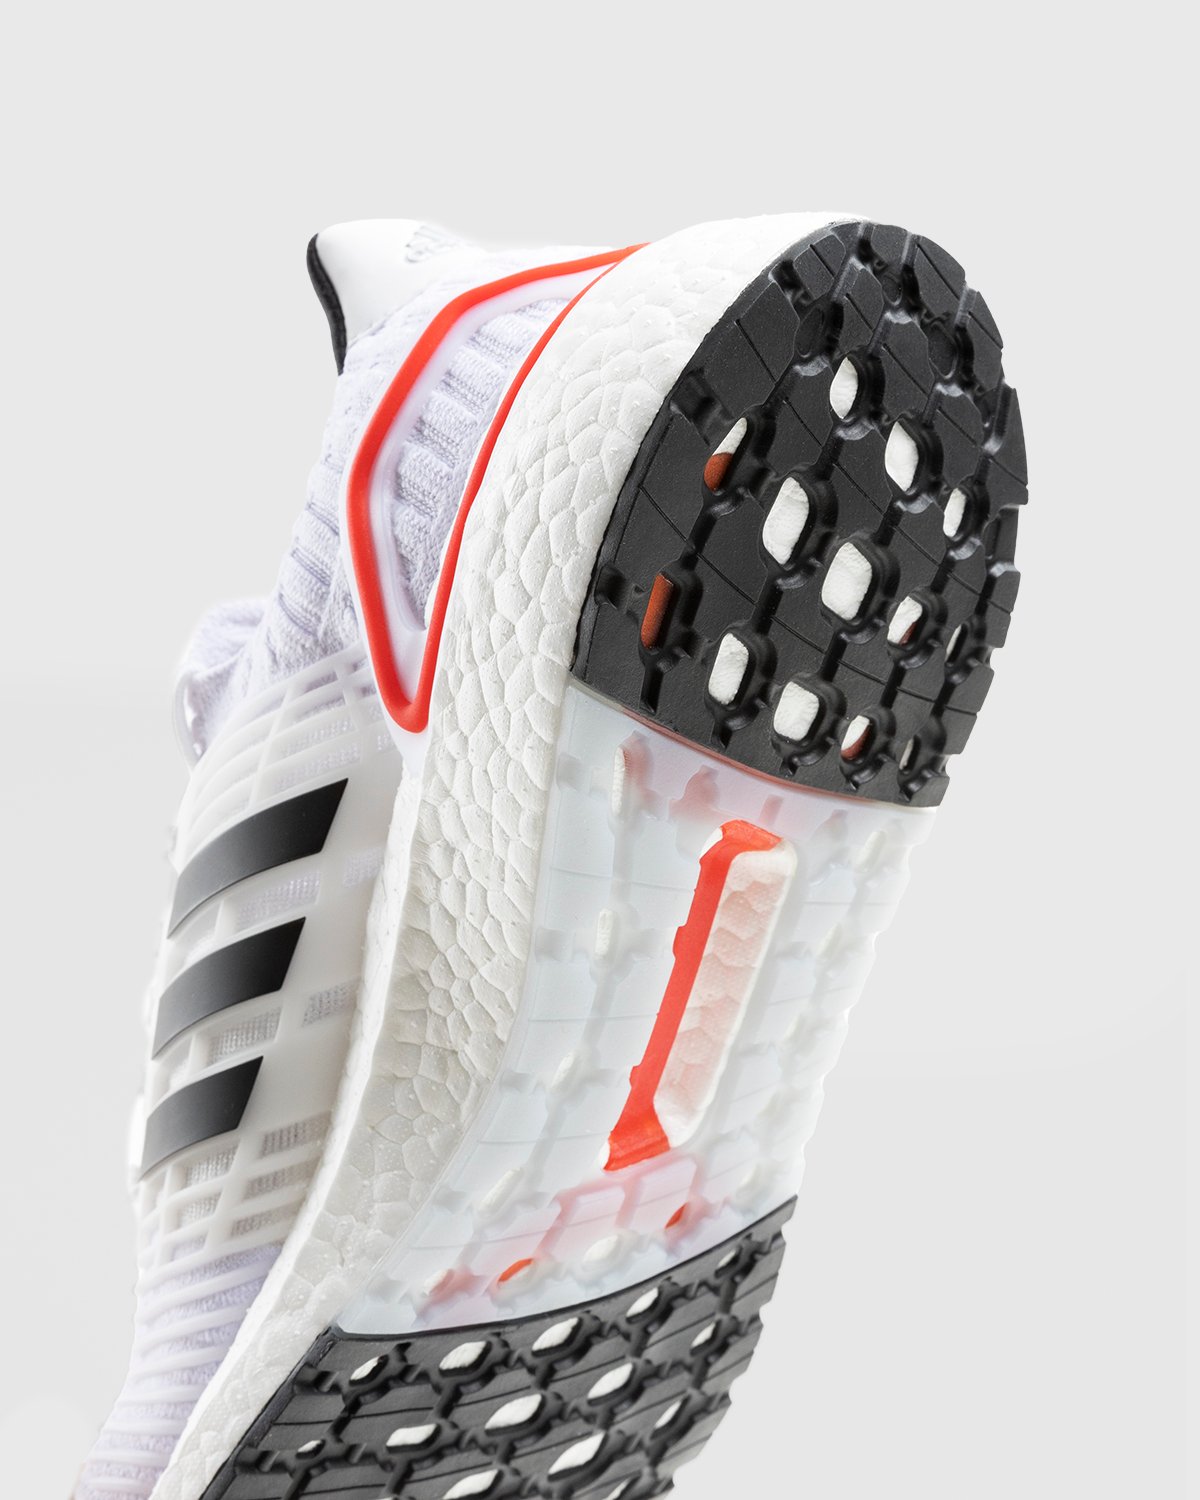 Adidas - Ultraboost Climacool 1 DNA White/Black/Red - Footwear - White - Image 6